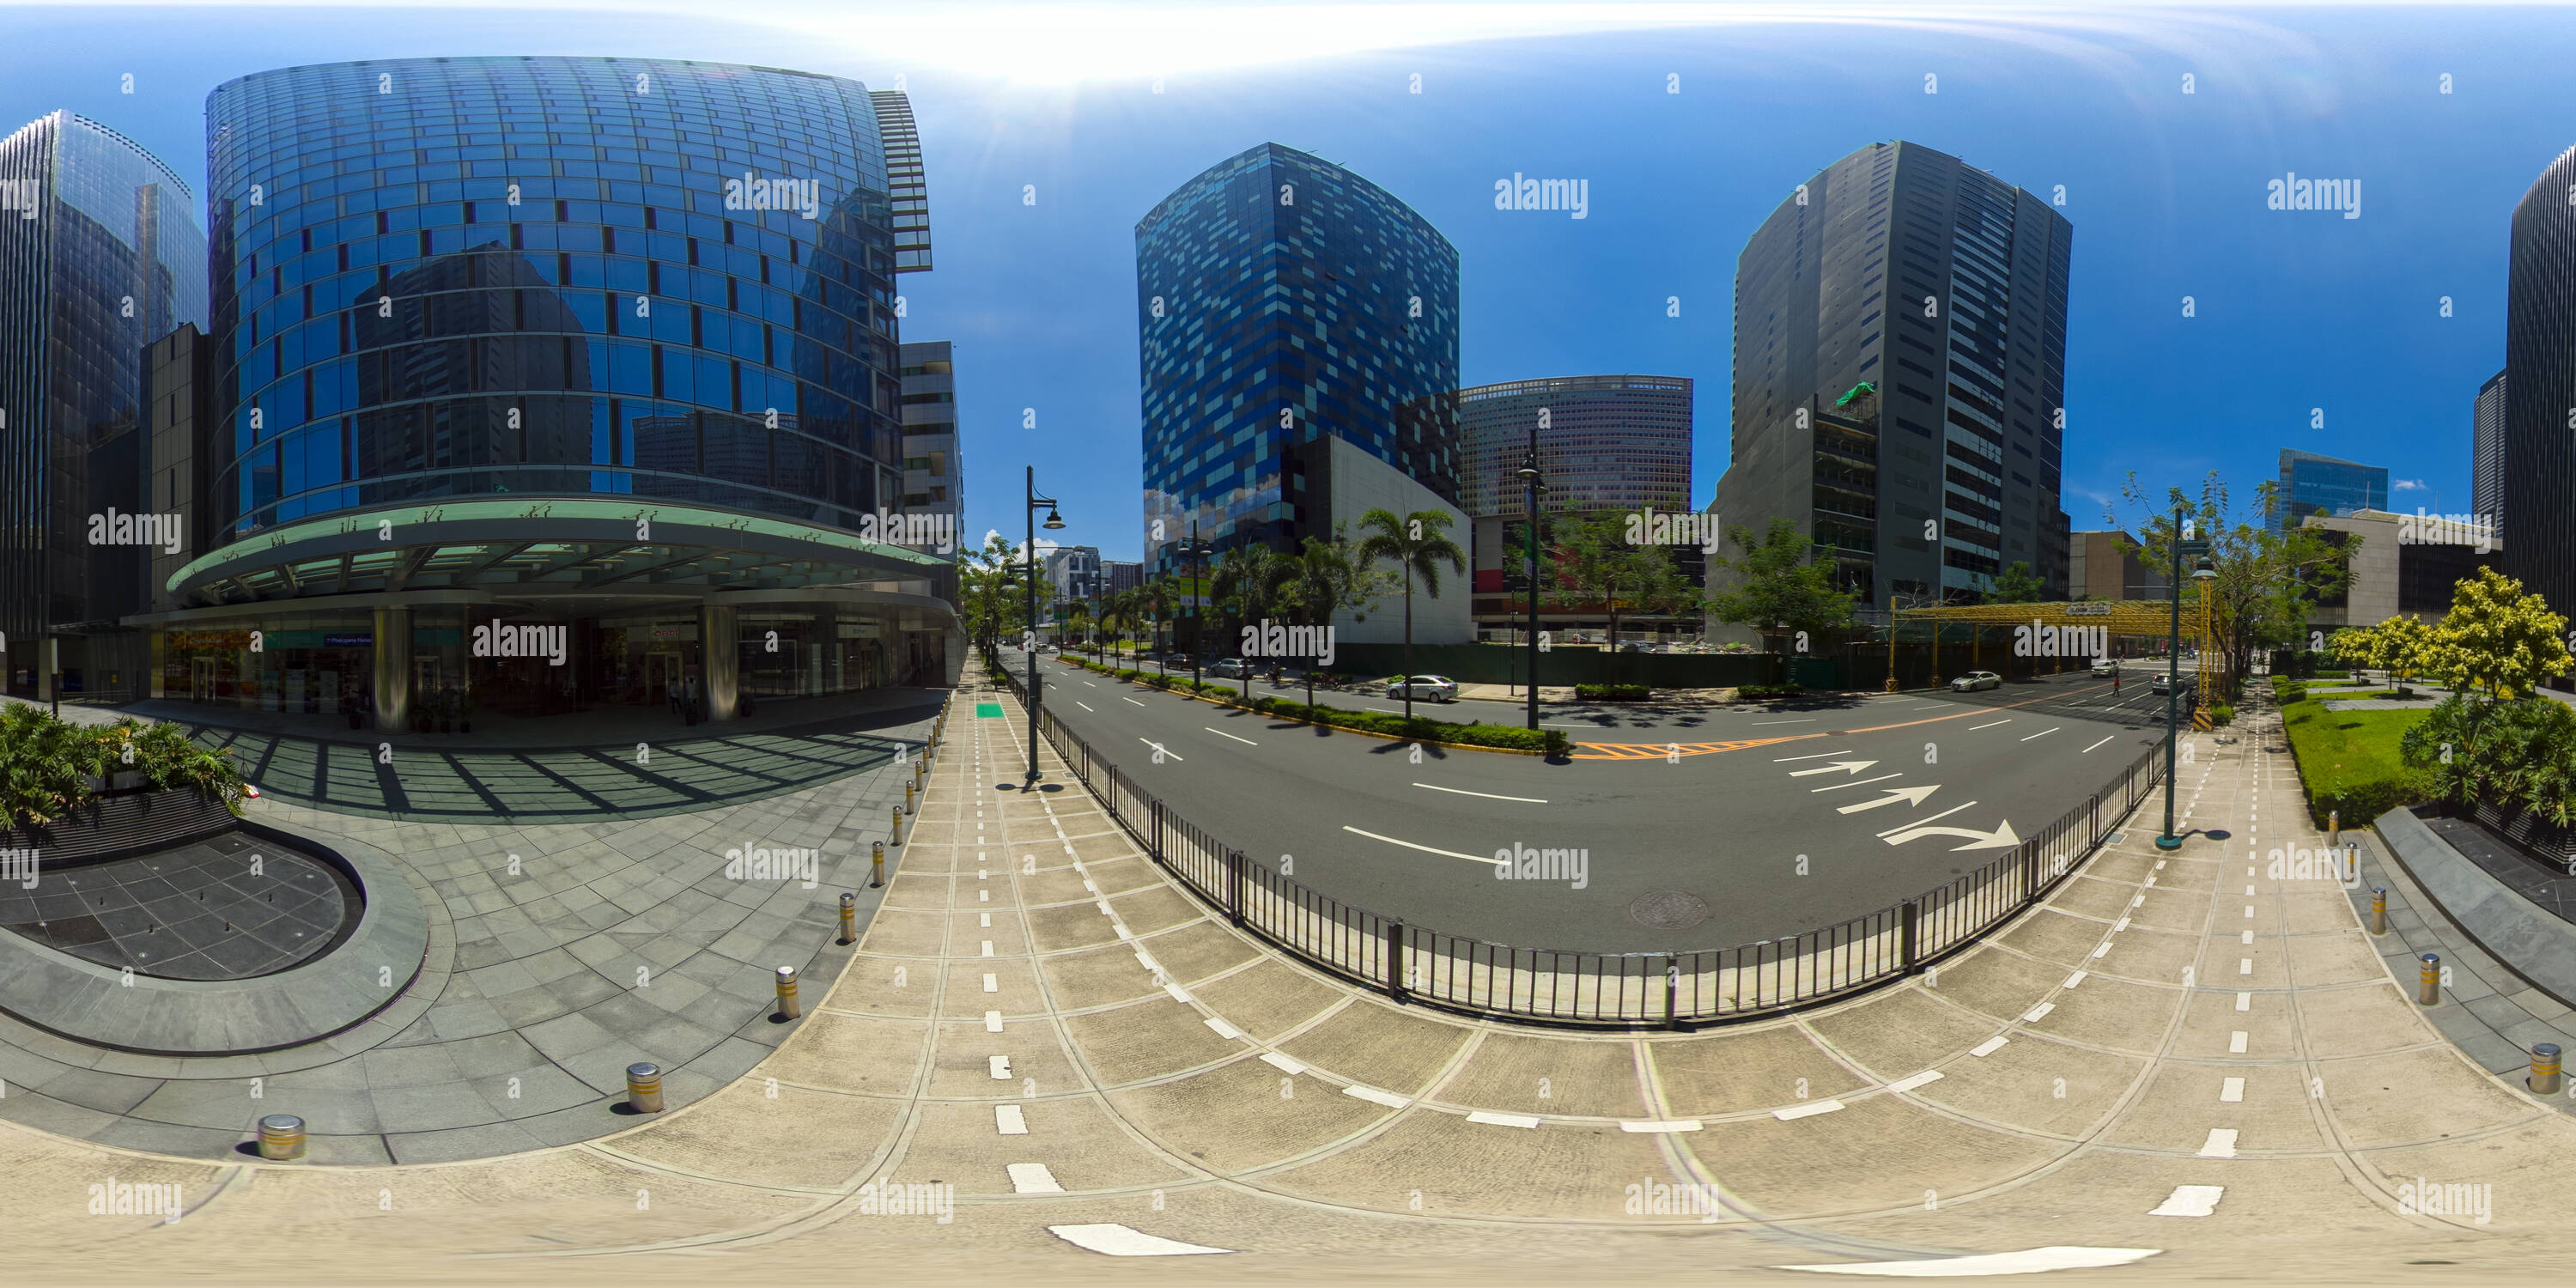 360 degree panoramic view of Manila, the capital of the Philippines with skyscrapers.